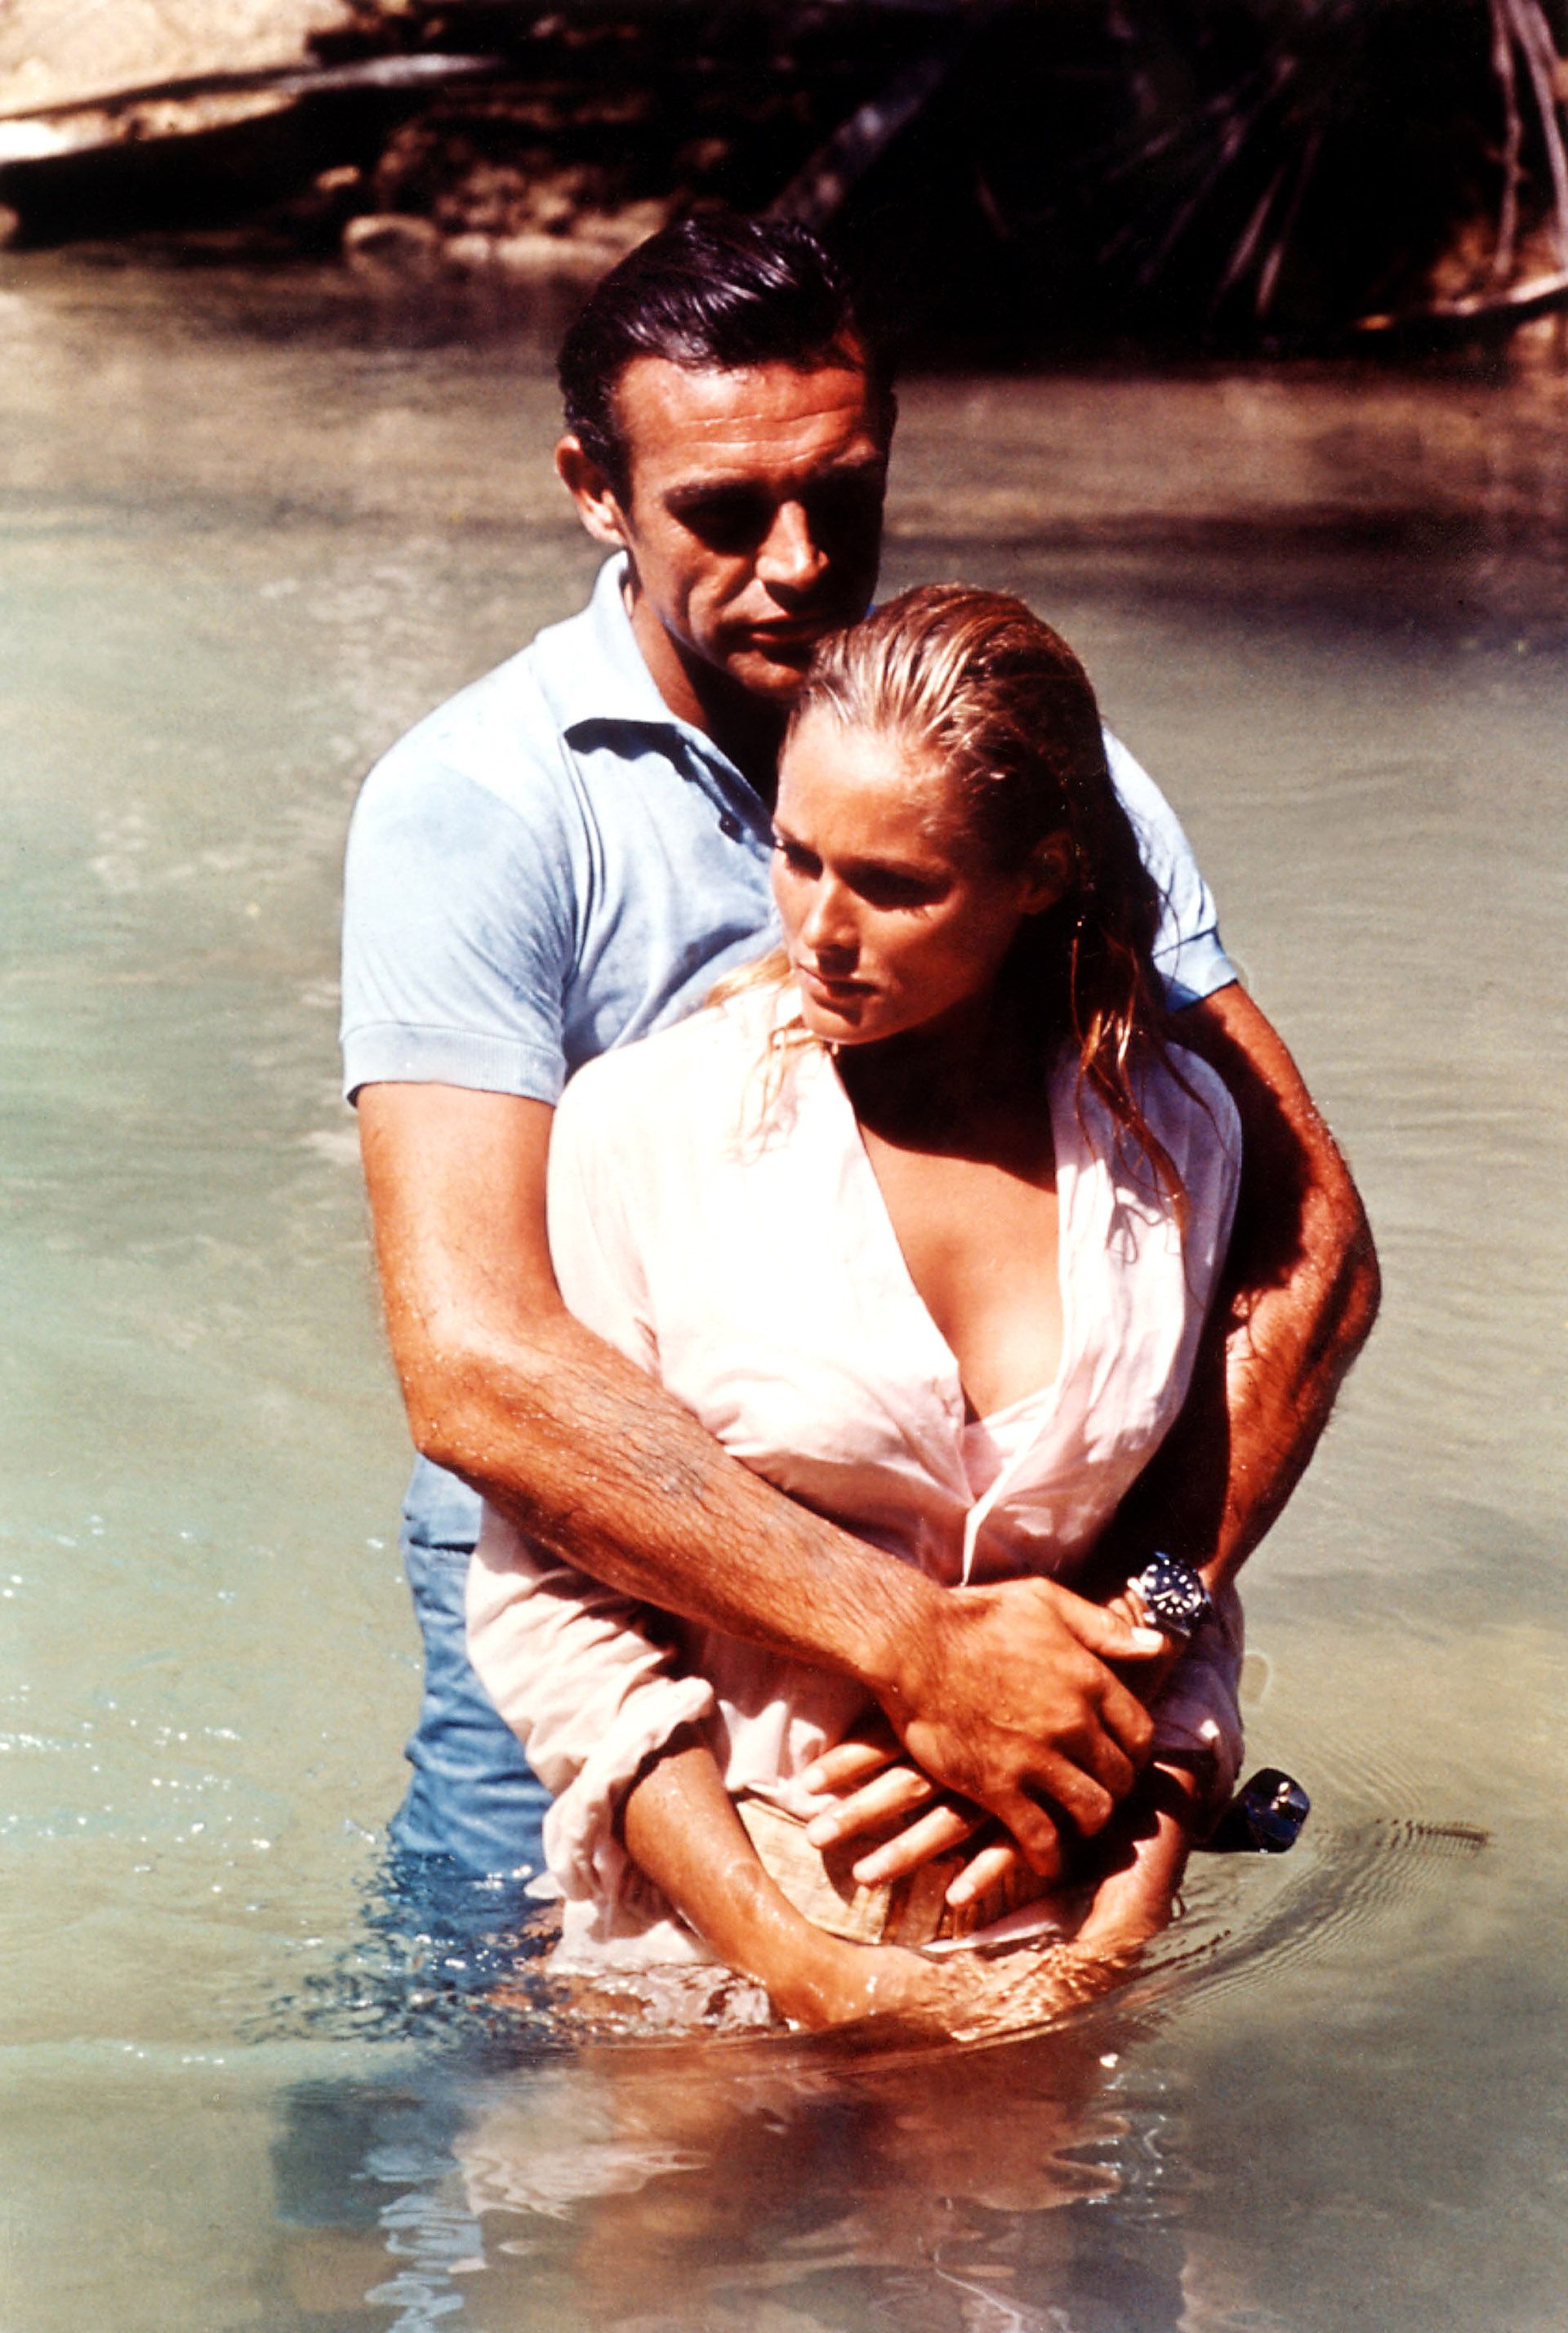 “Dr No” (James Bond), Sean Connery y Ursula Andress (Shutterstock)